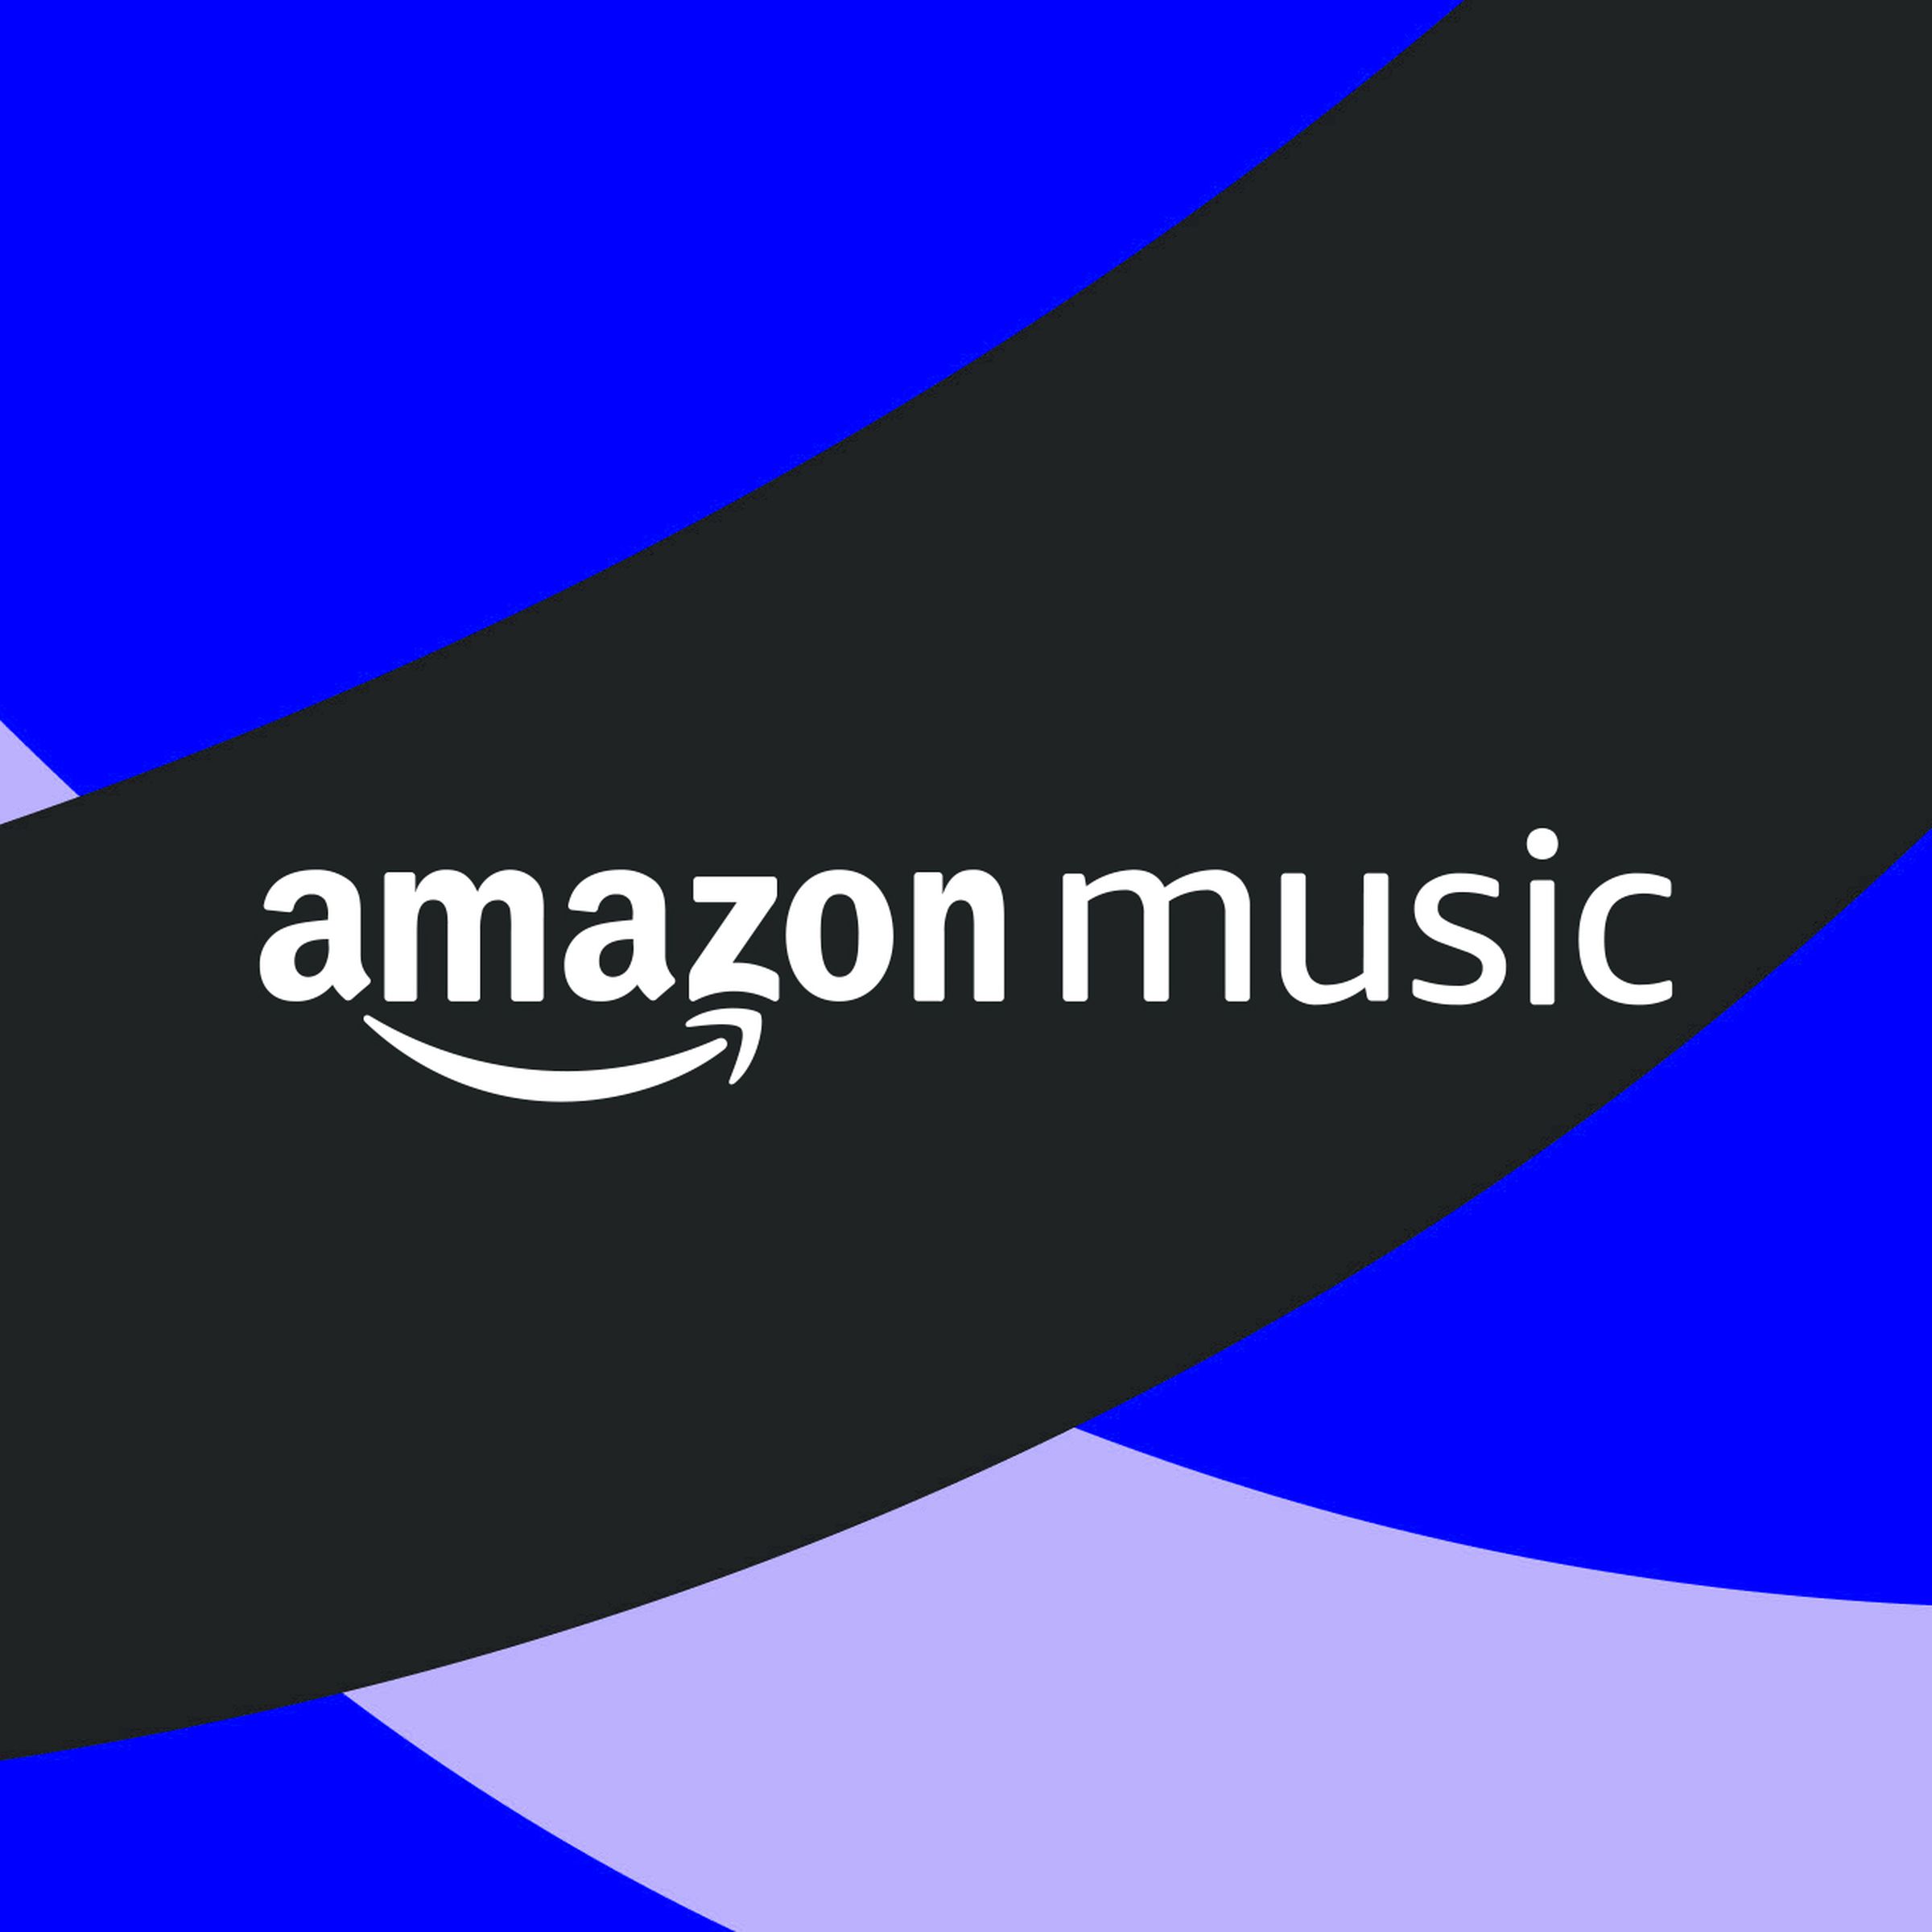 Amazon Music logo over a blue and black background